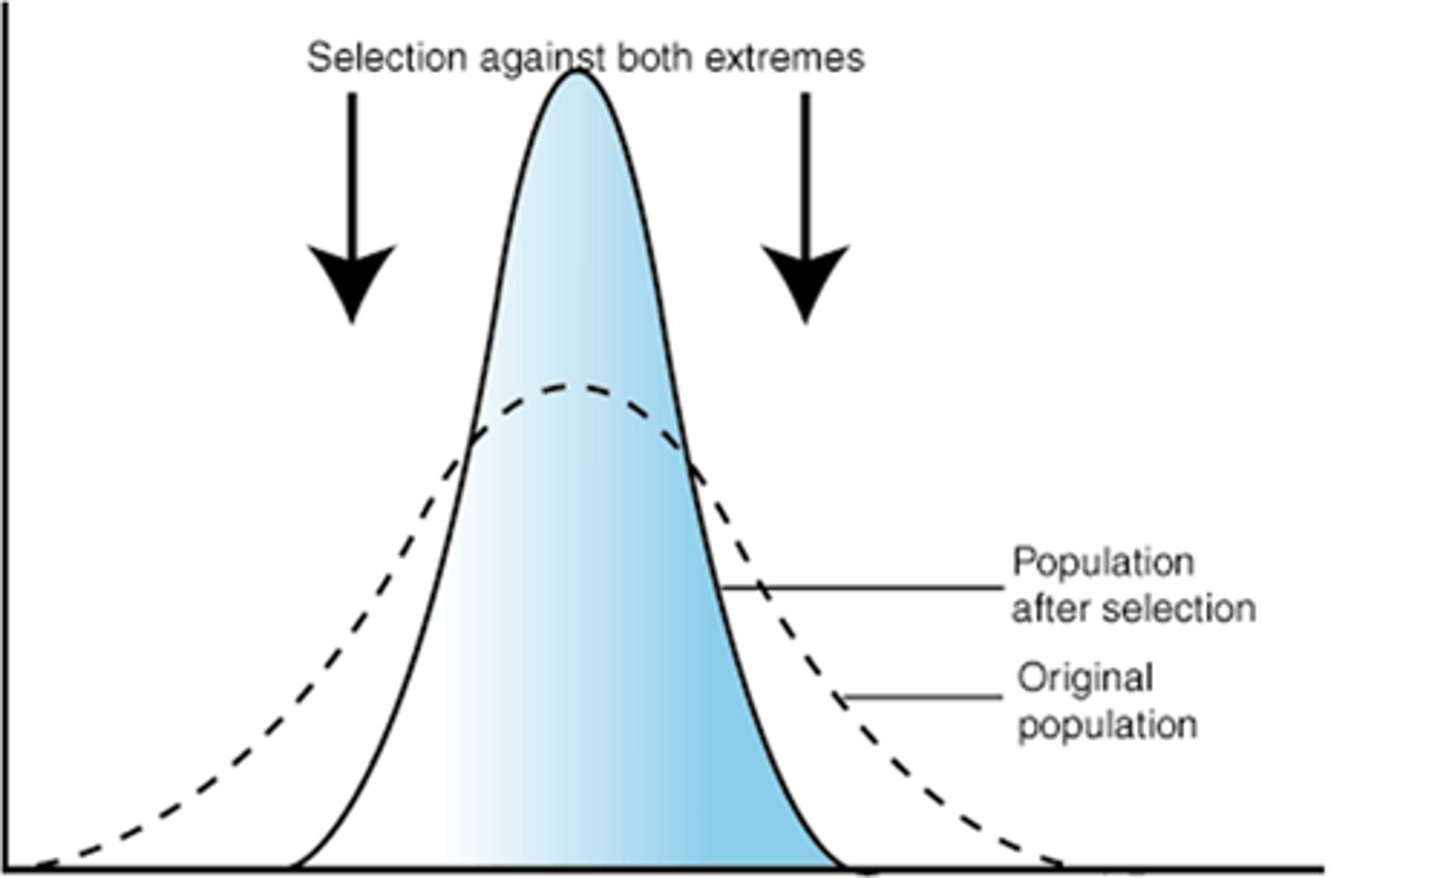 <p>-The "average" trait is selected</p><p>-This is thought to be the most common mechanism of action for natural selection because most traits do not appear to change drastically over time.</p><p>-A classic example of this is the human birth weight.</p>